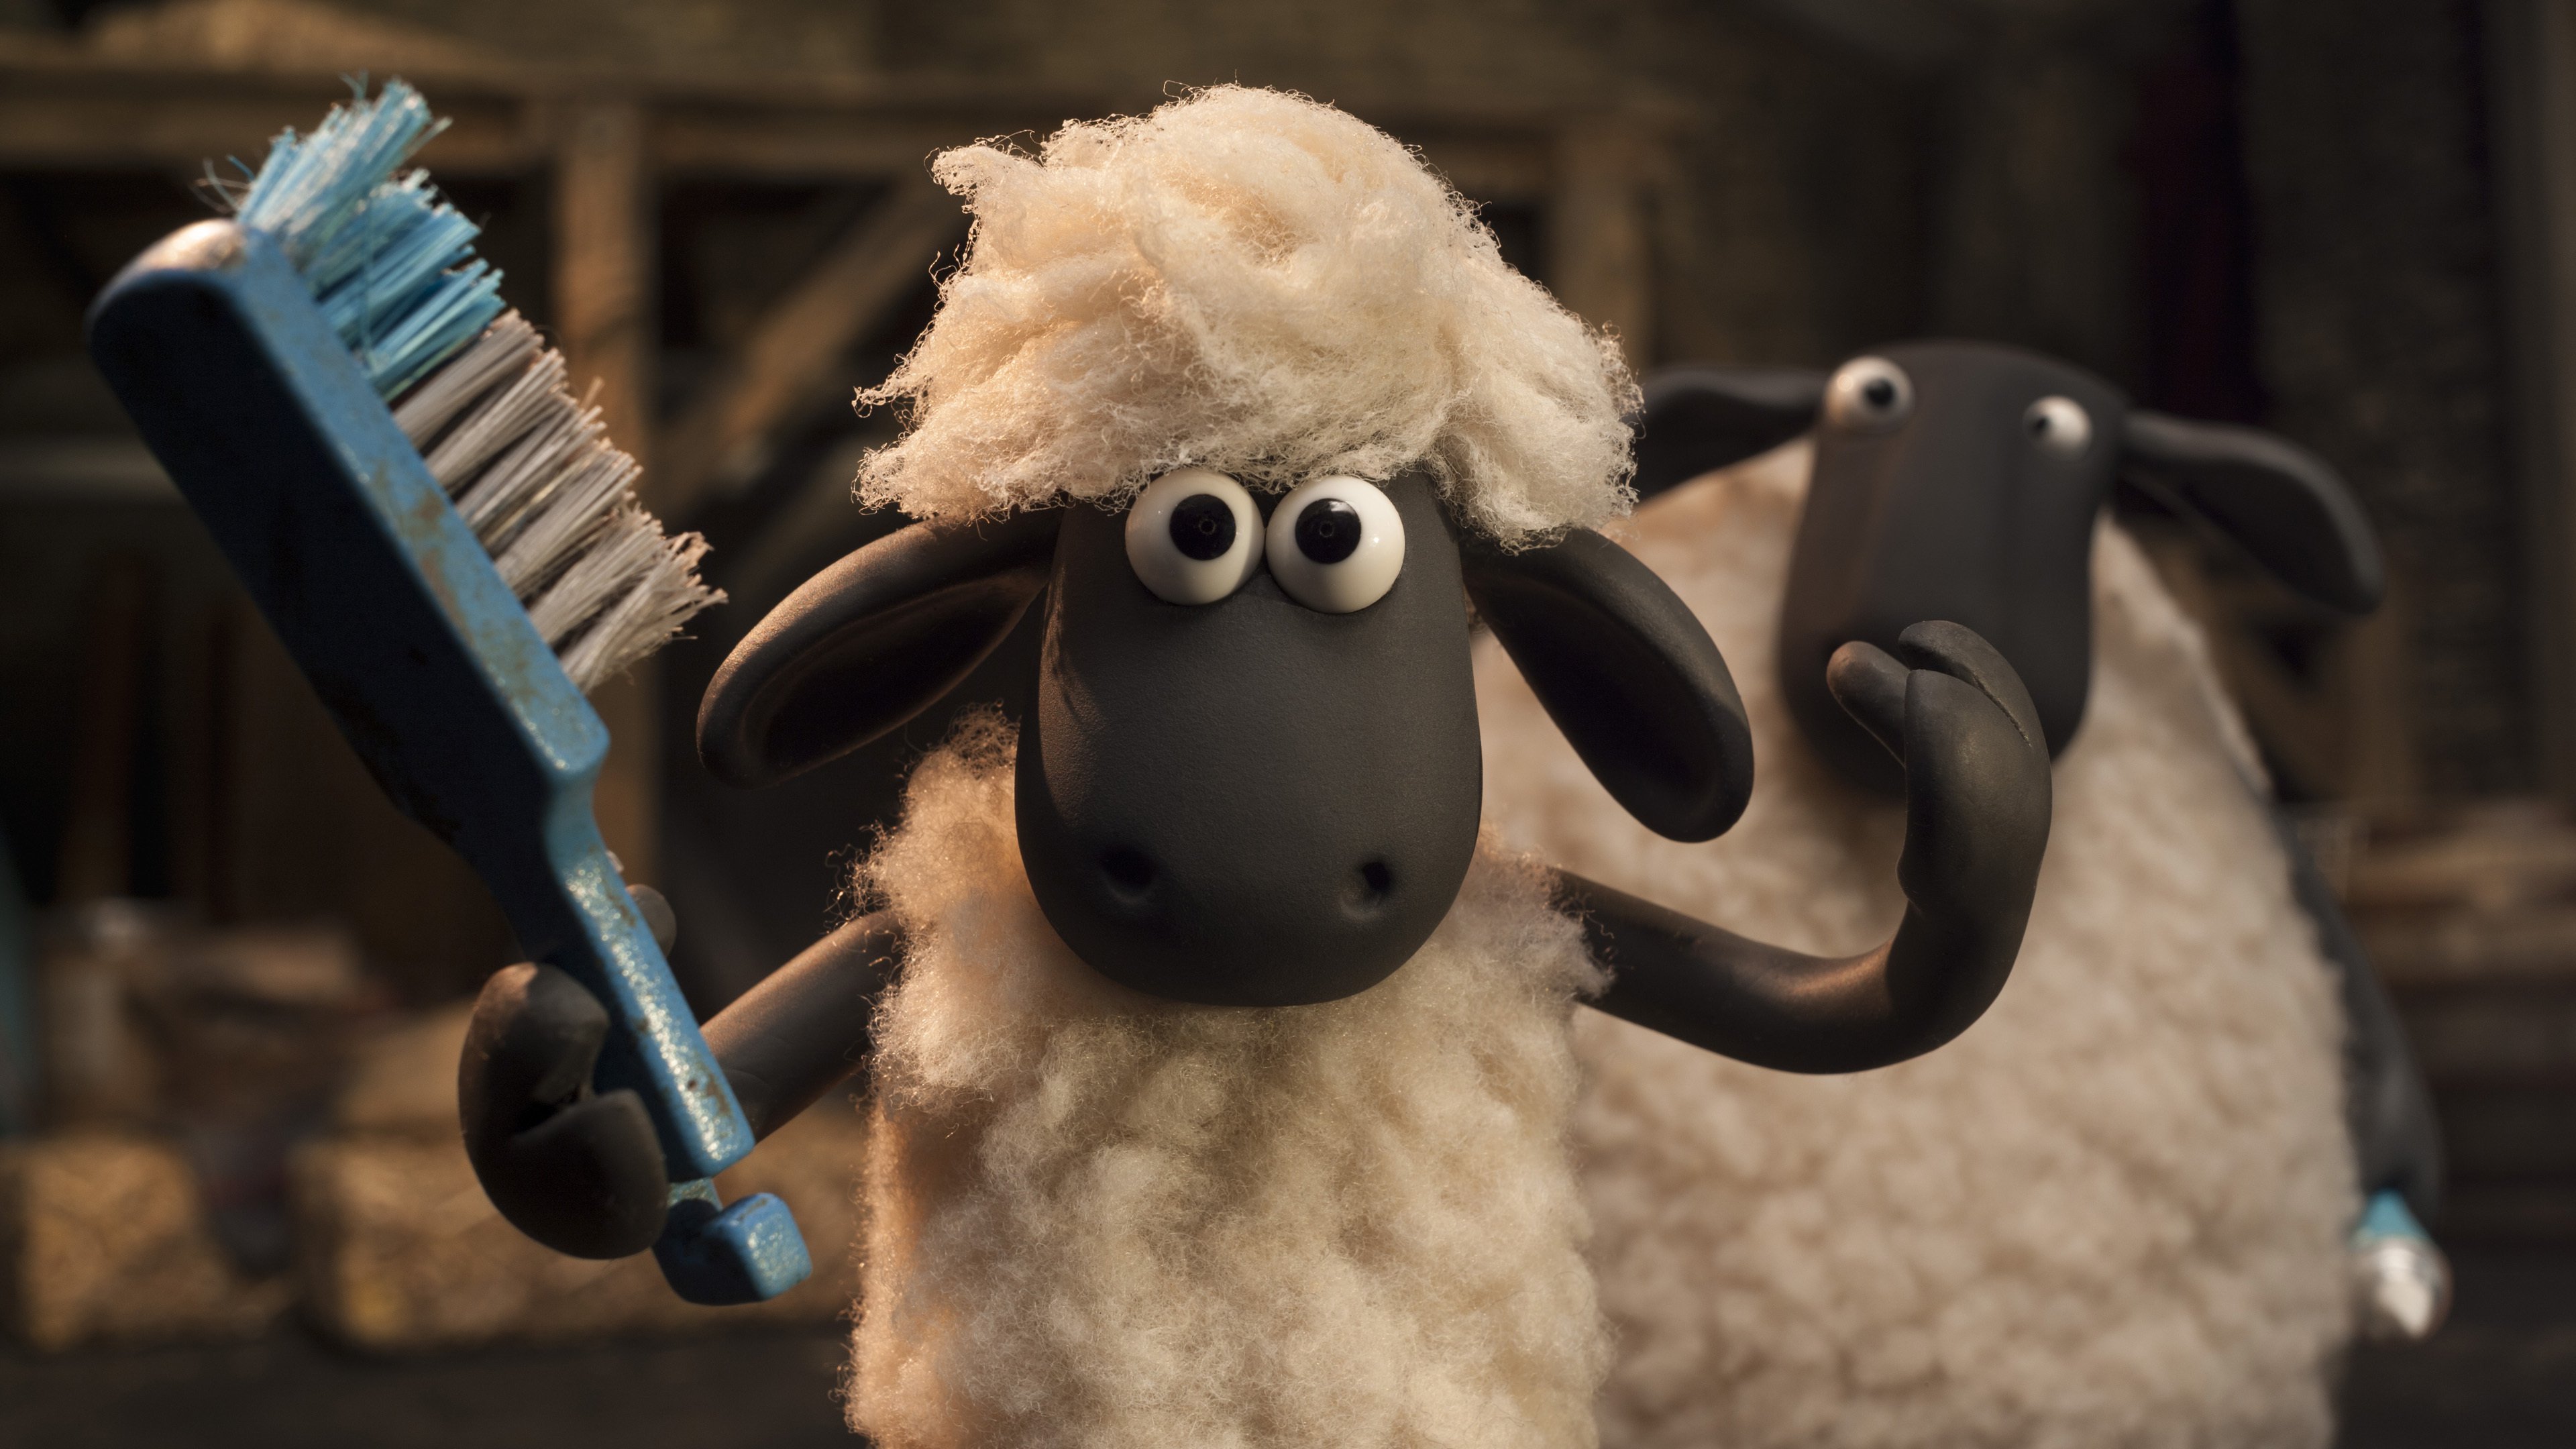 Download Shaun The Sheep Movie wallpaper for mobile phone, free Shaun The Sheep Movie HD picture